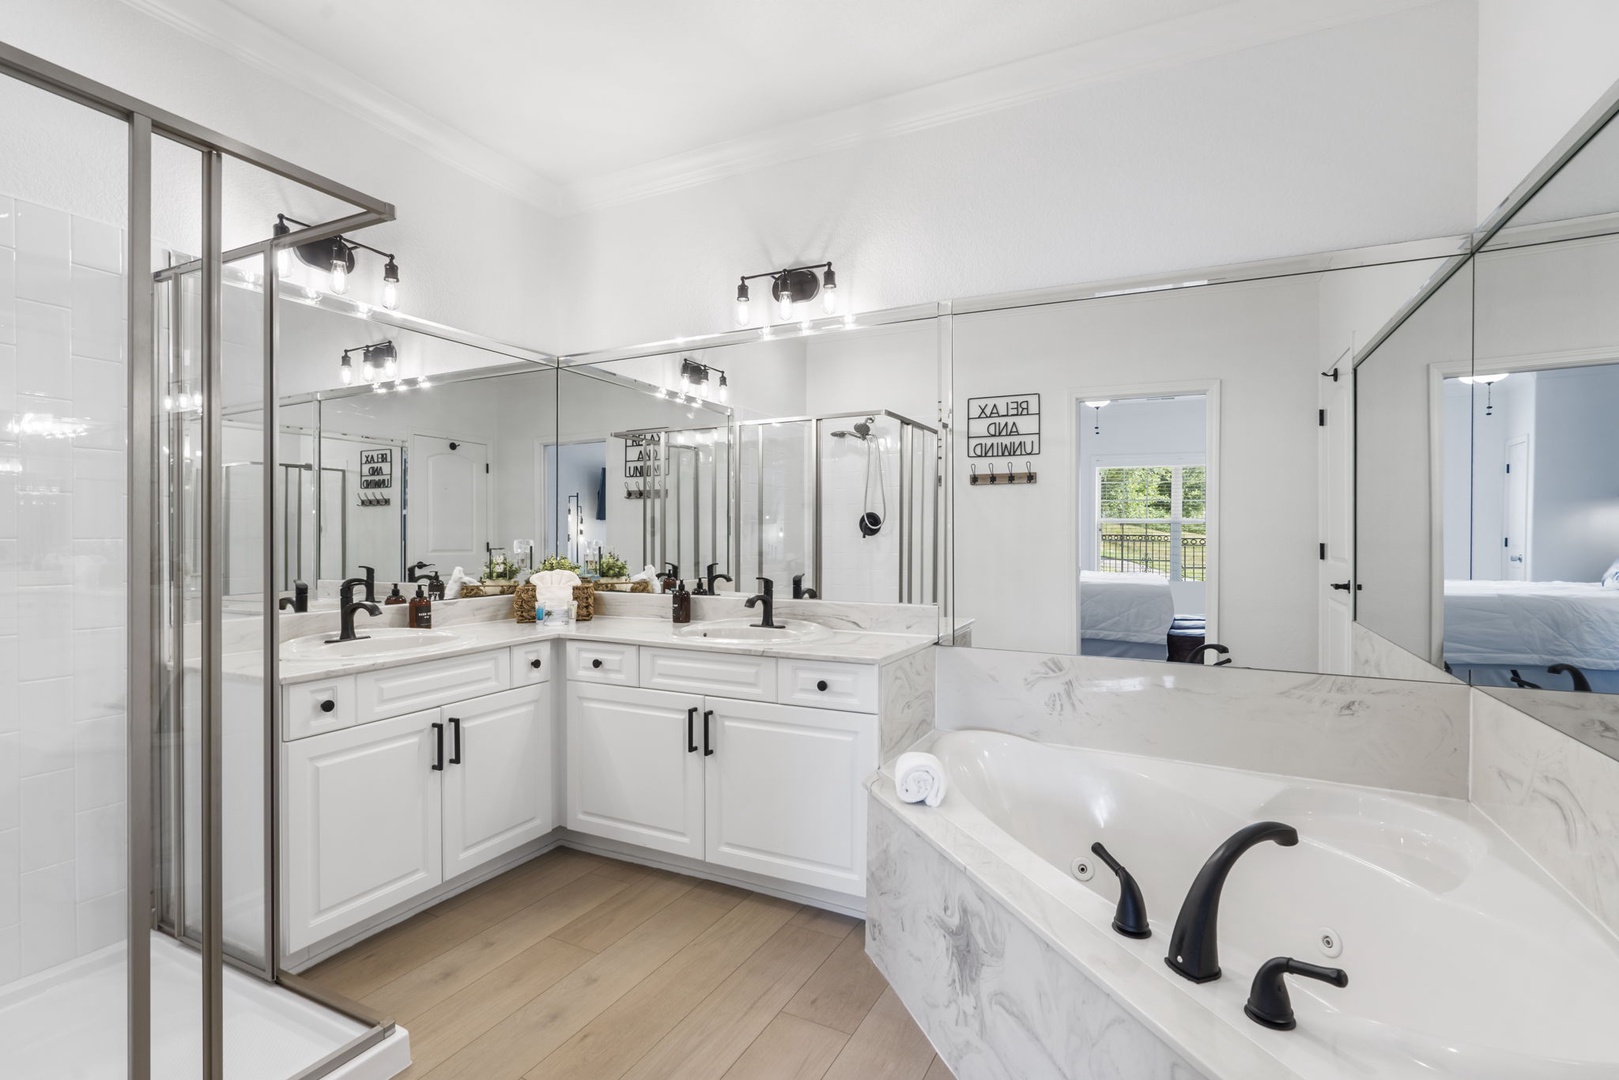 King ensuite boasts a large double vanity, standing shower and a jetted tub